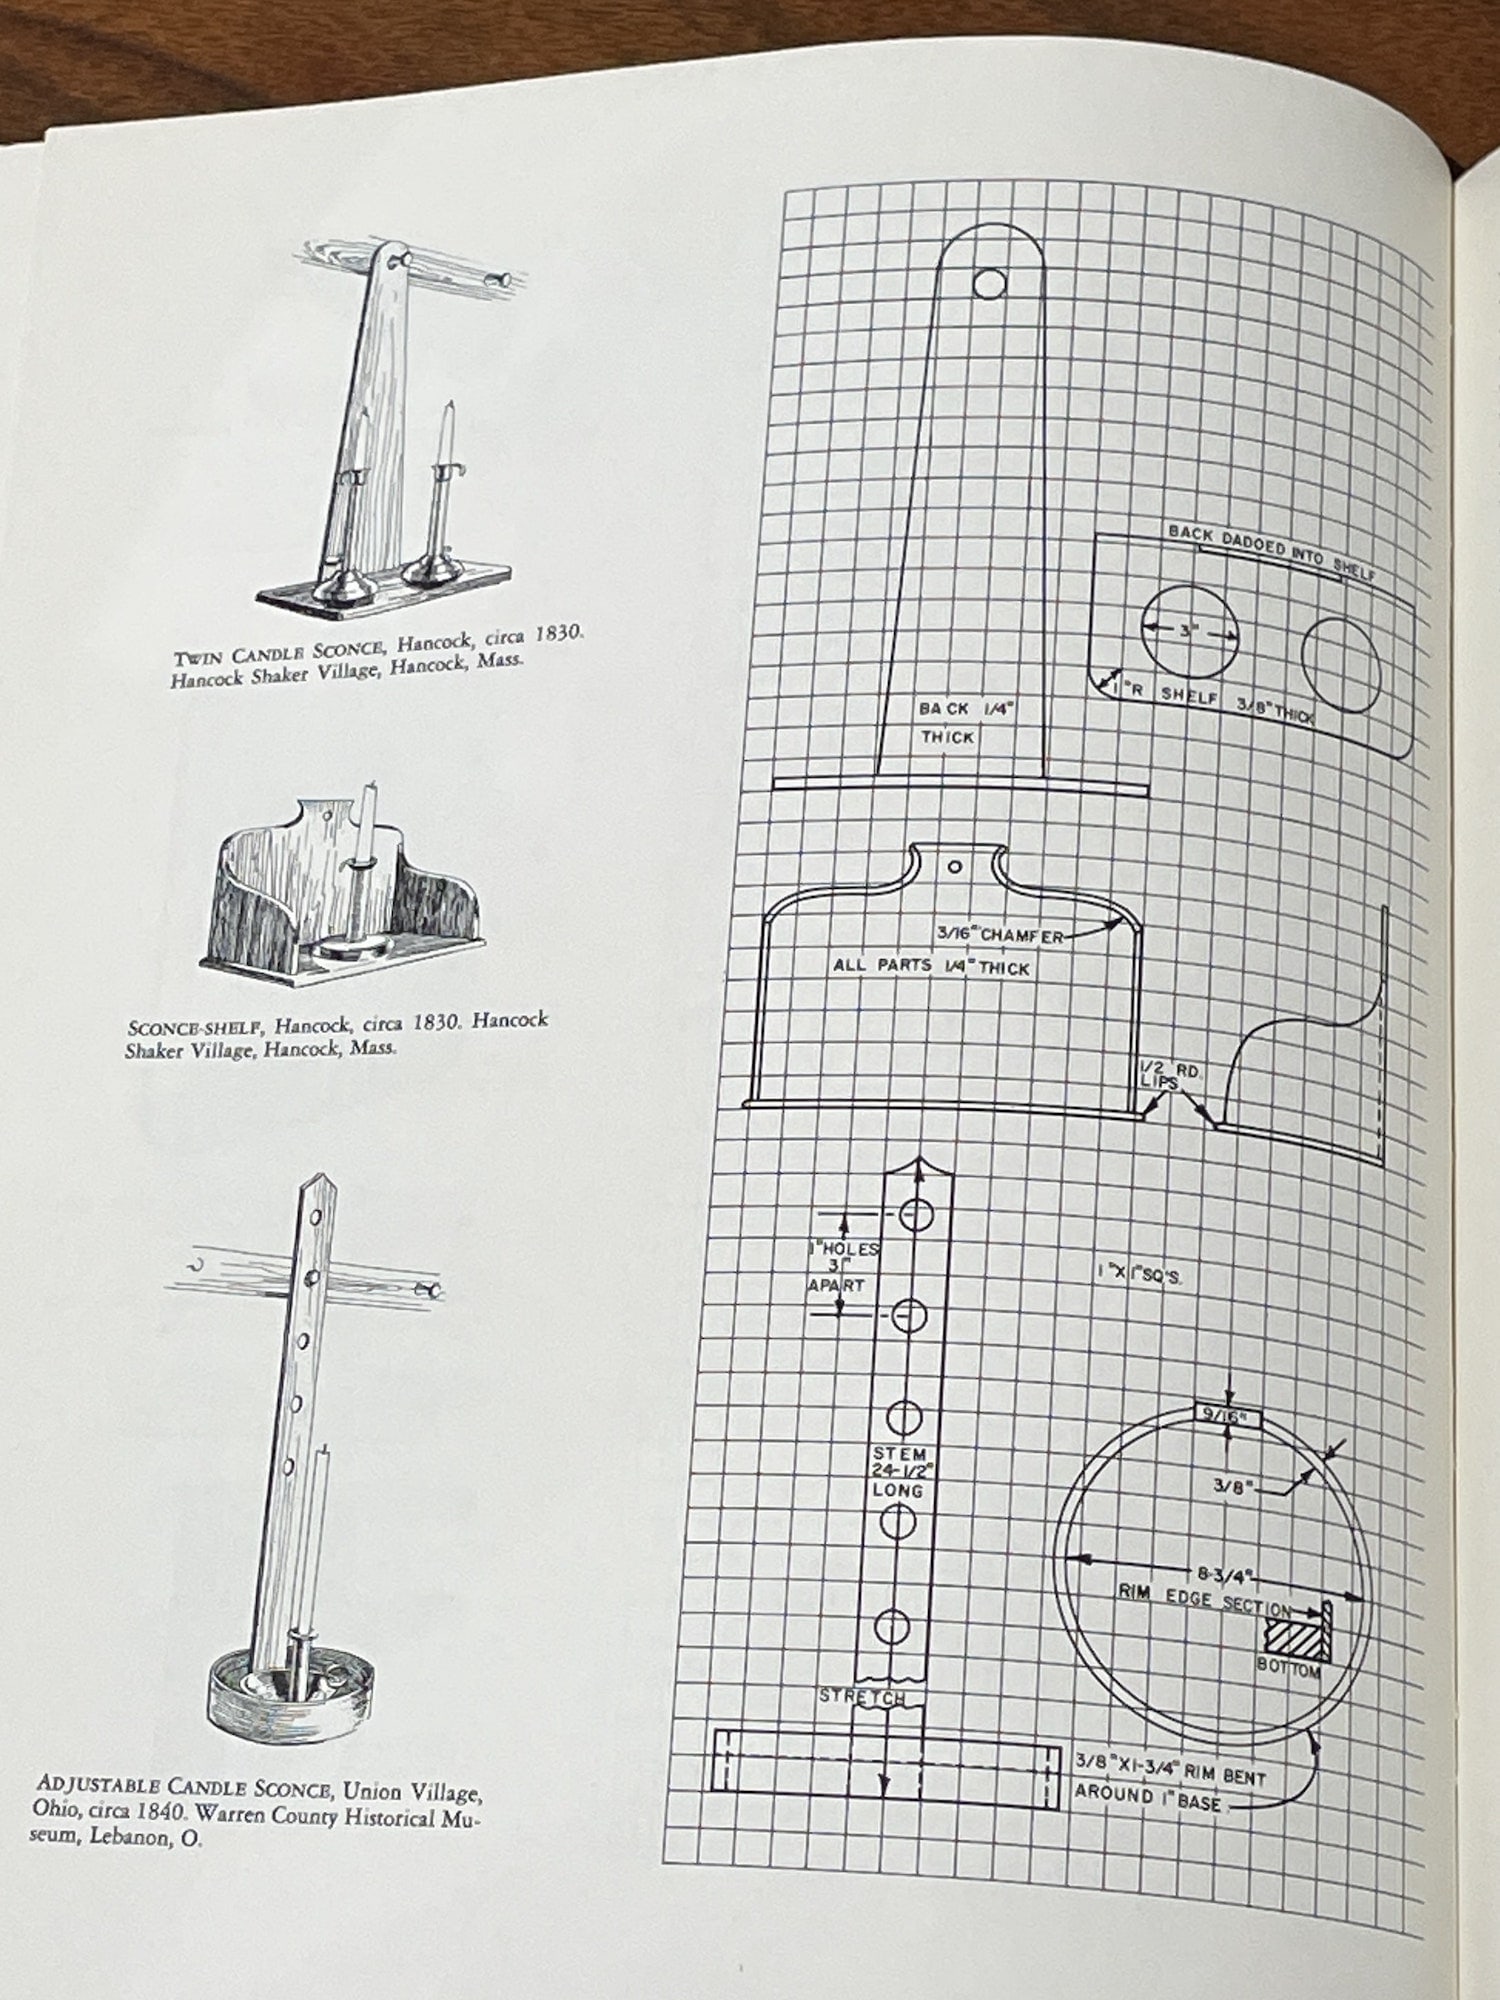 diagram and gridded measurement instructions for how to build a candle sconce-shelf from the book The American Shakers and Their Furniture, by John G. Shea